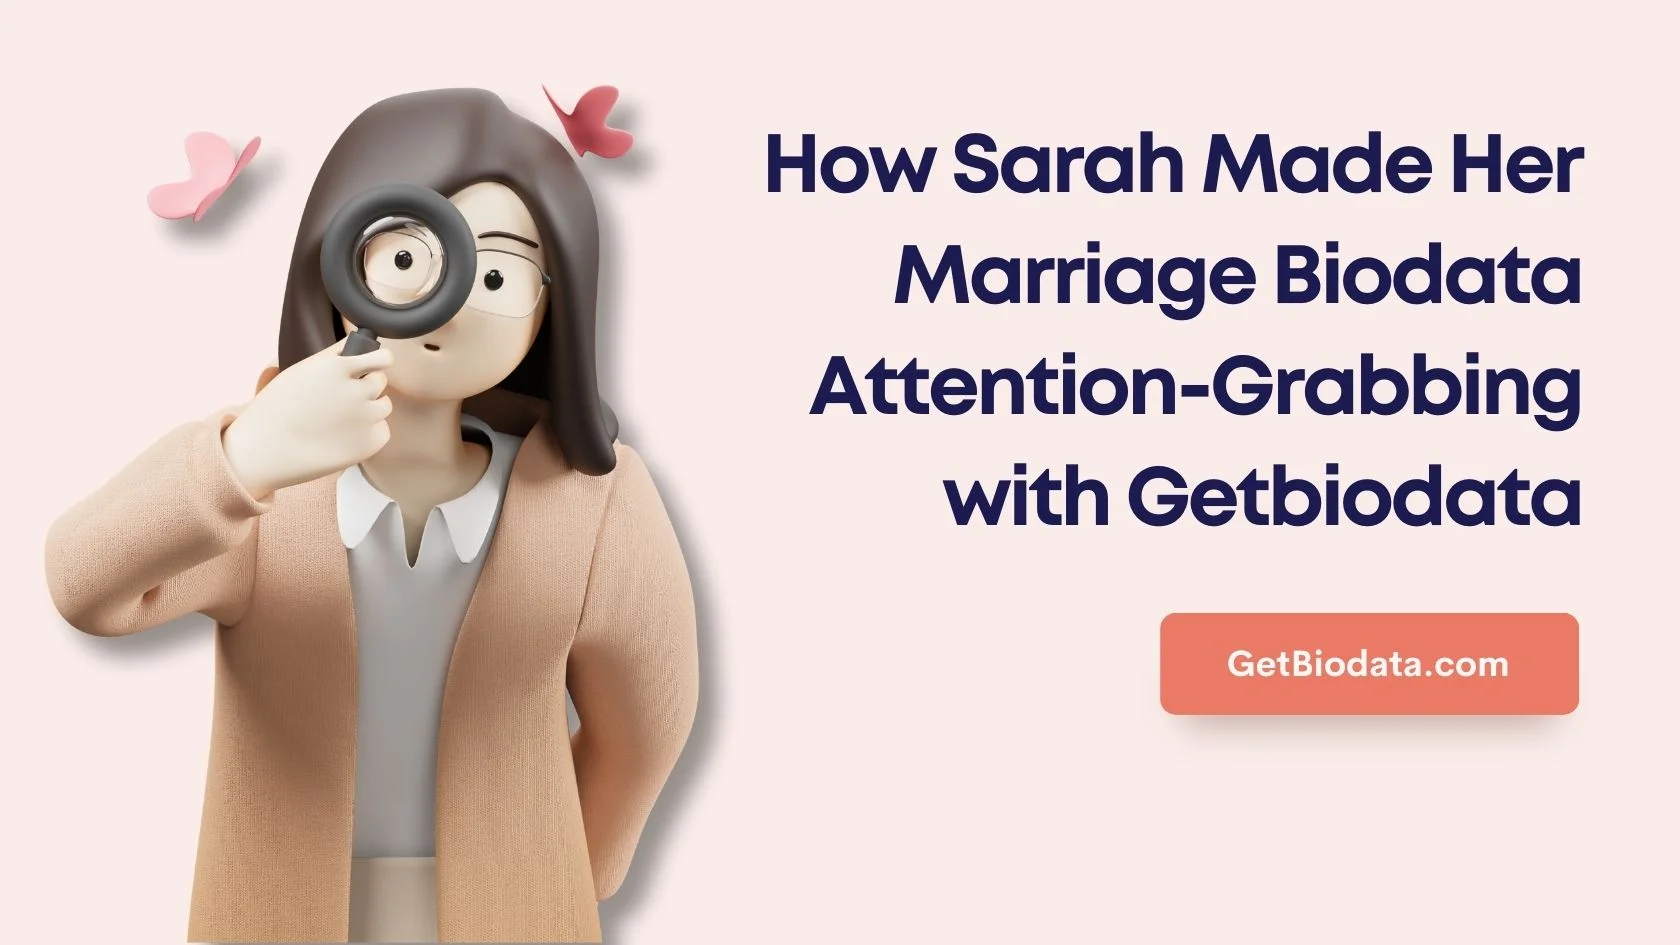 How Sarah Made Her Marriage Biodata Attention-Grabbing with Getbiodata